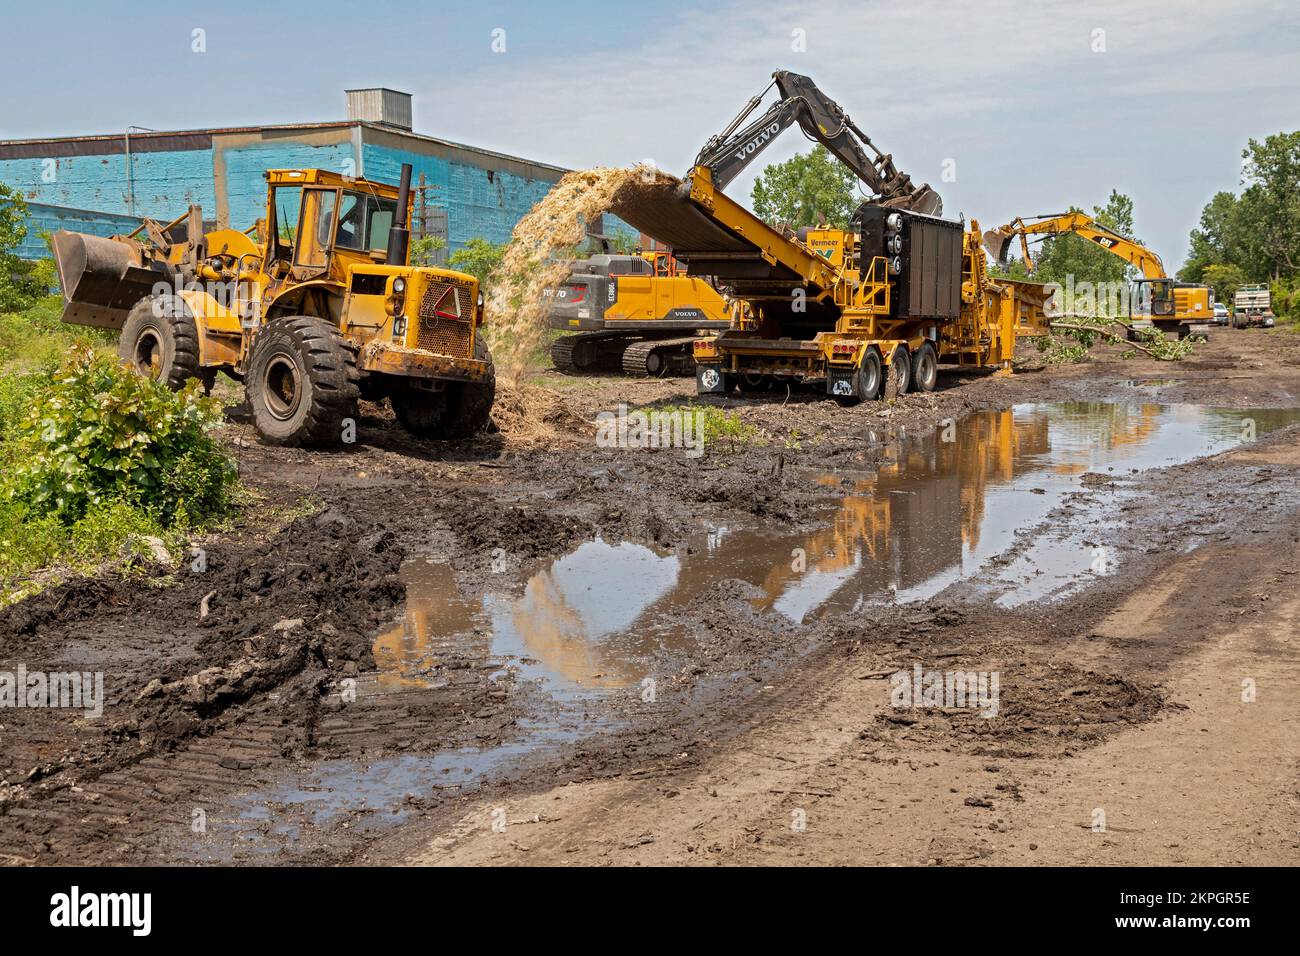 Detroit, Michigan - Using heavy equipment, workers clear trees, shredding them into woodchips, from an abandoned railroad right of way. They are clear Stock Photo